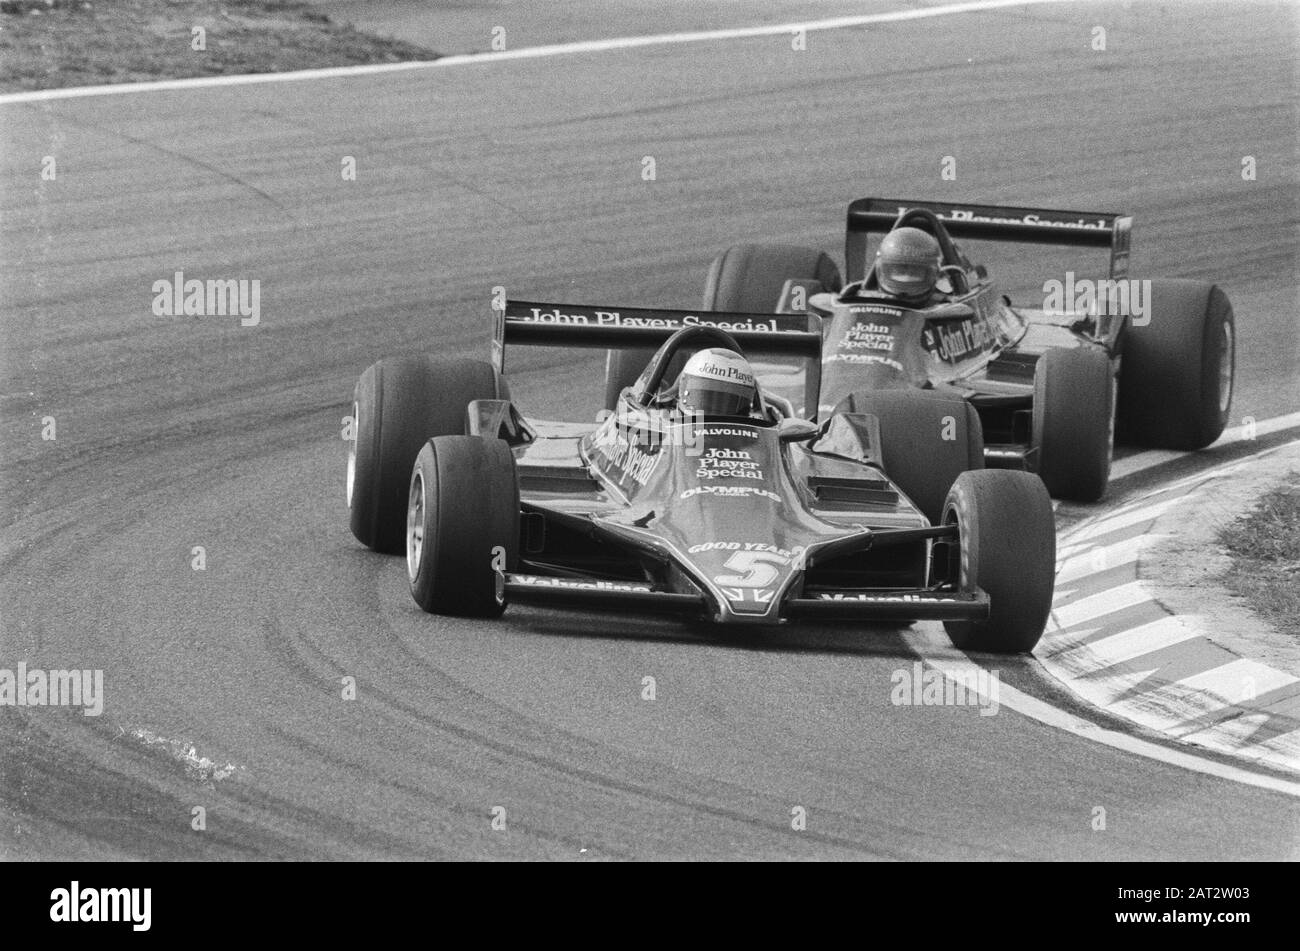 Grand Prix Zandvoort; Mario Andretti on the head with there behind Ronnie Petterson Date: August 27, 1978 Location: Noord-Holland, Zandvoort Keywords: car races Stock Photo